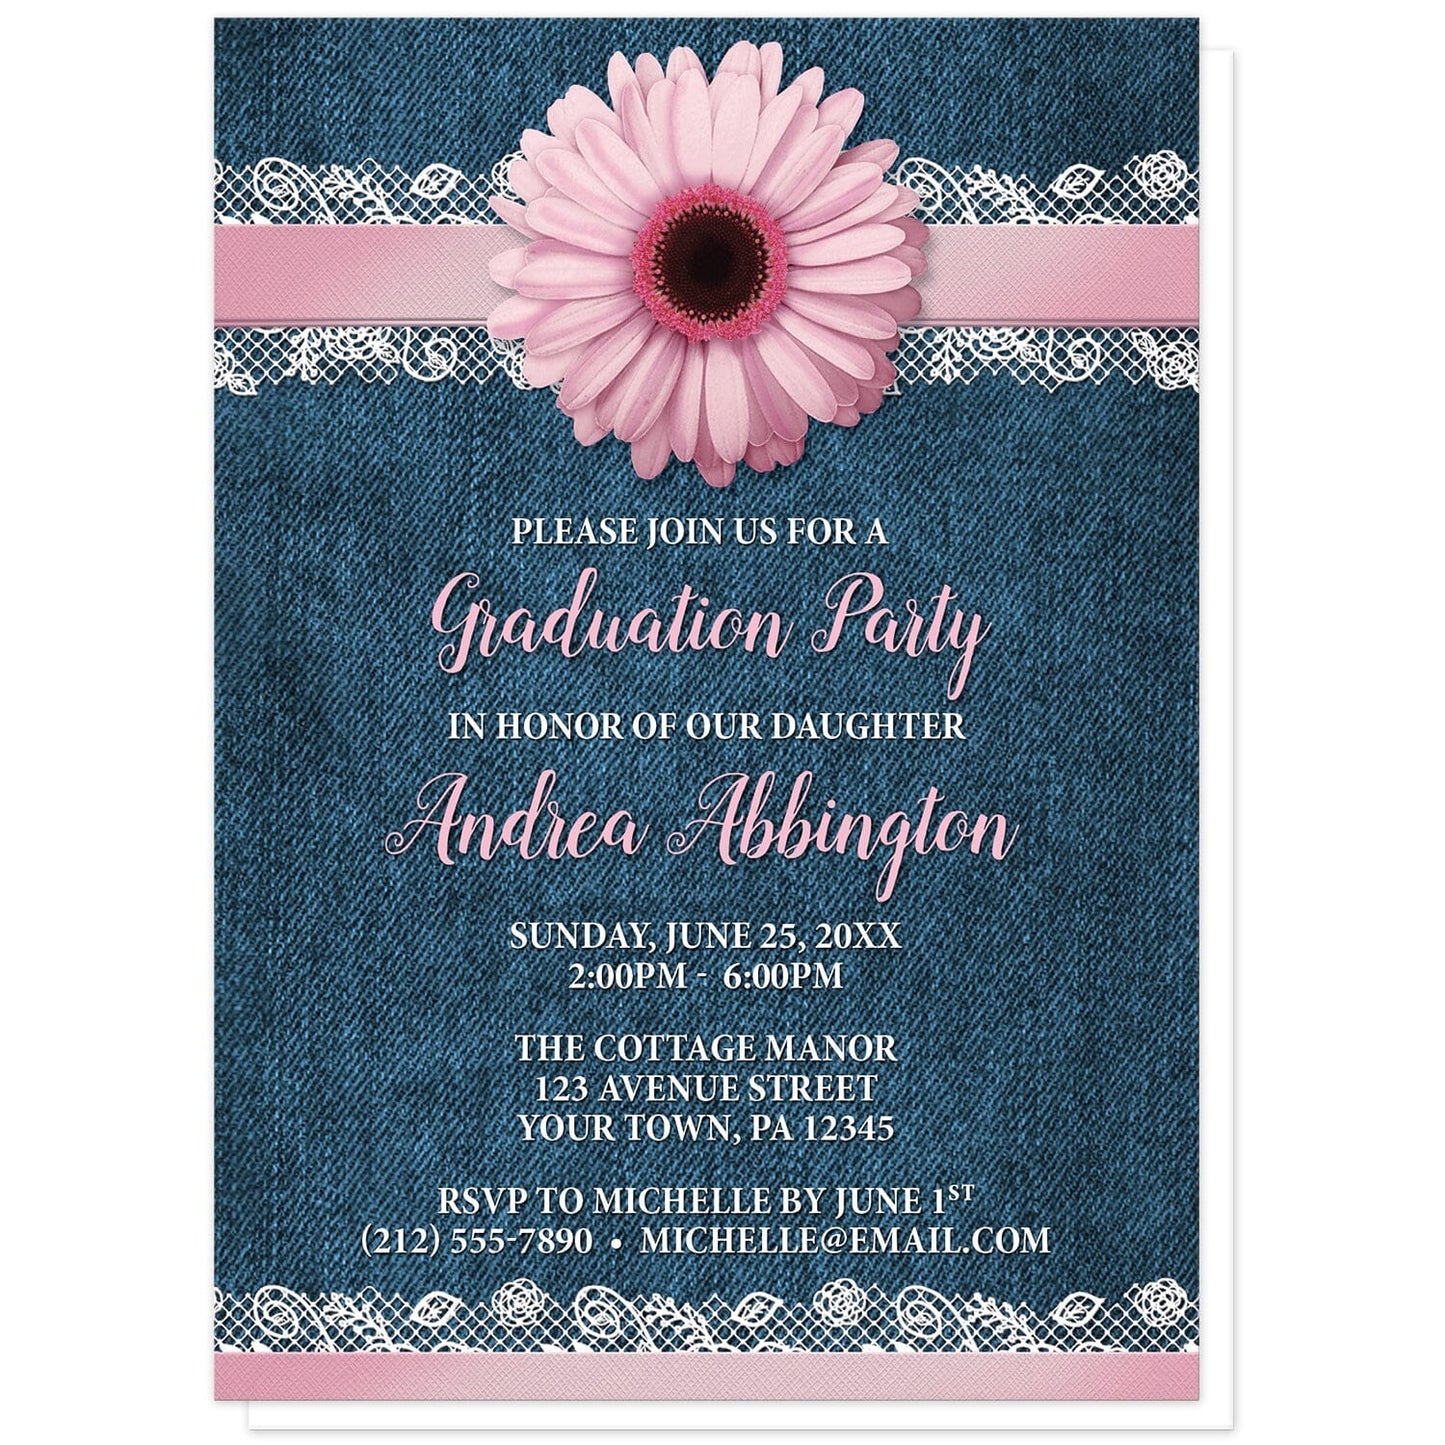 Pink Daisy Lace Rustic Denim Graduation Invitations at Artistically Invited. Southern-inspired pink daisy lace rustic denim graduation invitations with a pink daisy flower image centered at the top on a pink and white lace ribbon illustration. Your personalized graduation party details are custom printed in pink and white over a country blue denim background.